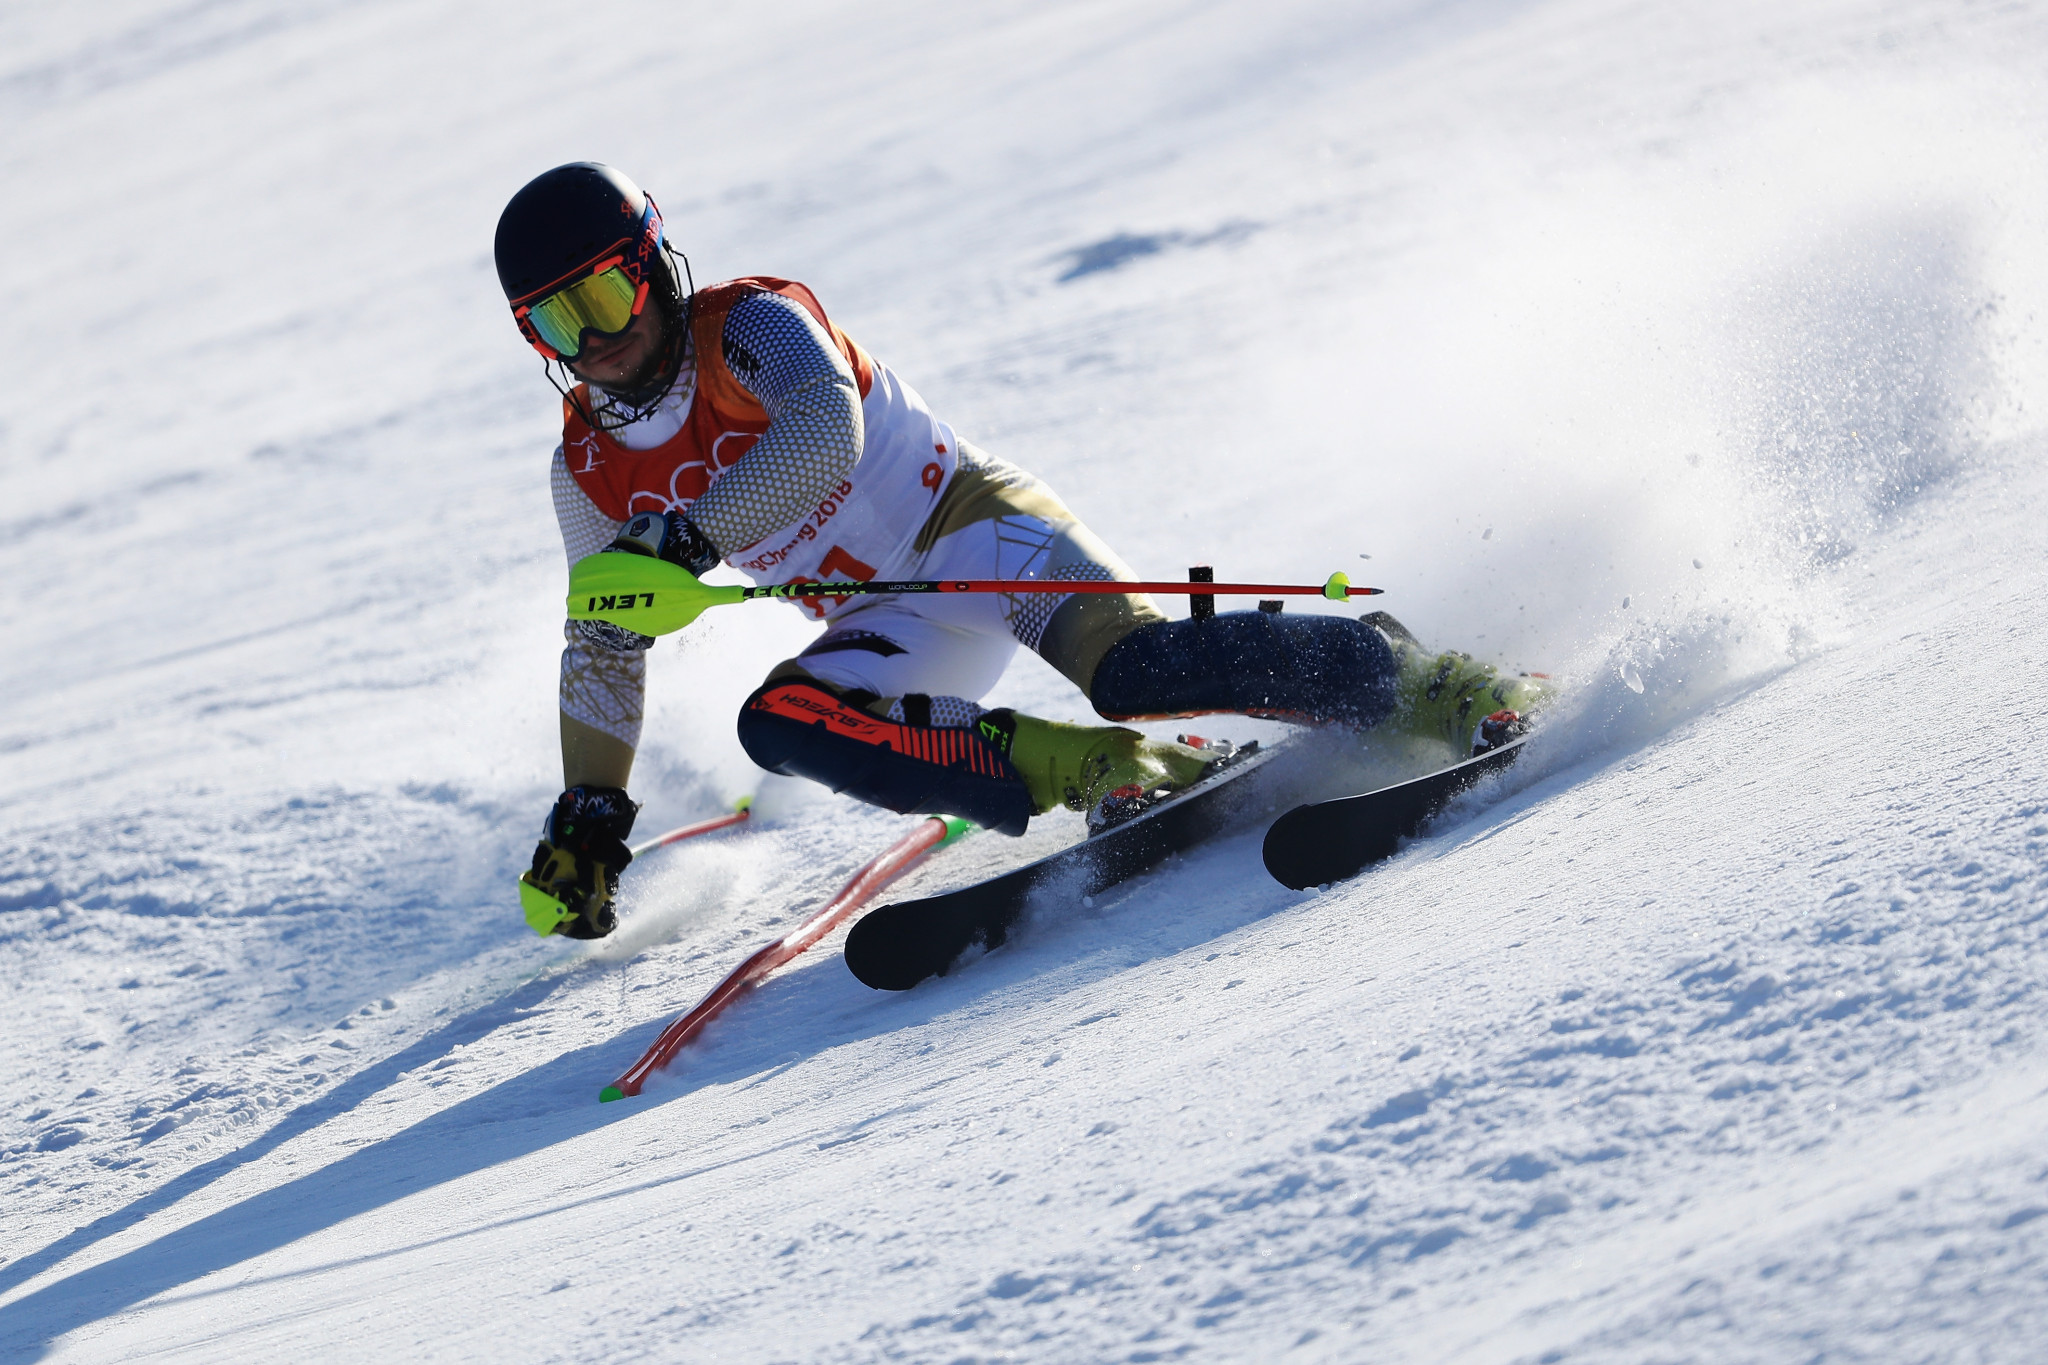 Iranian skier Hossein Saveh Shemshaki had competed in both Vancouver 2010 and Sochi 2014 ©Getty Images